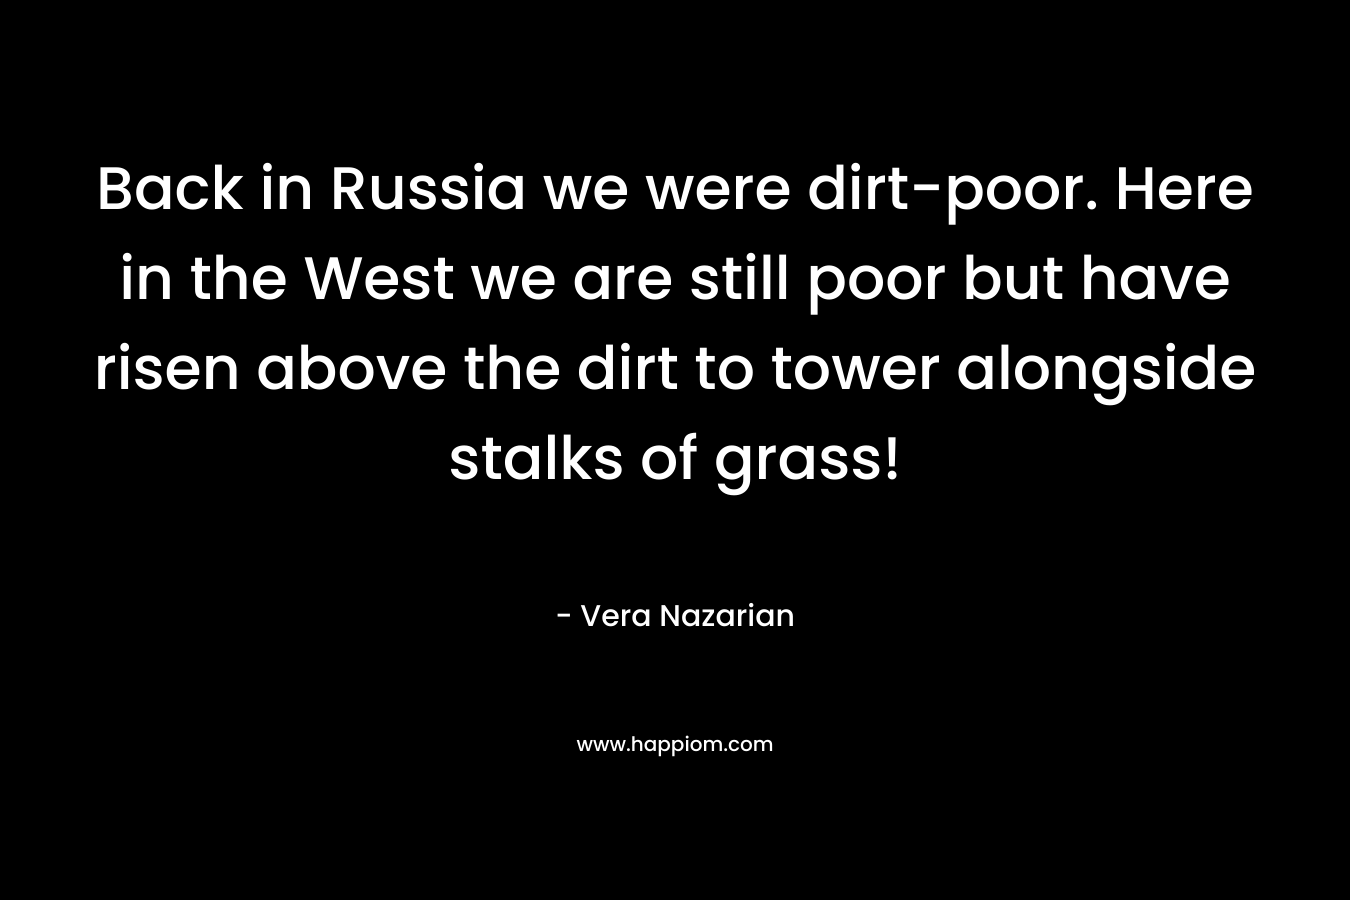 Back in Russia we were dirt-poor. Here in the West we are still poor but have risen above the dirt to tower alongside stalks of grass! – Vera Nazarian